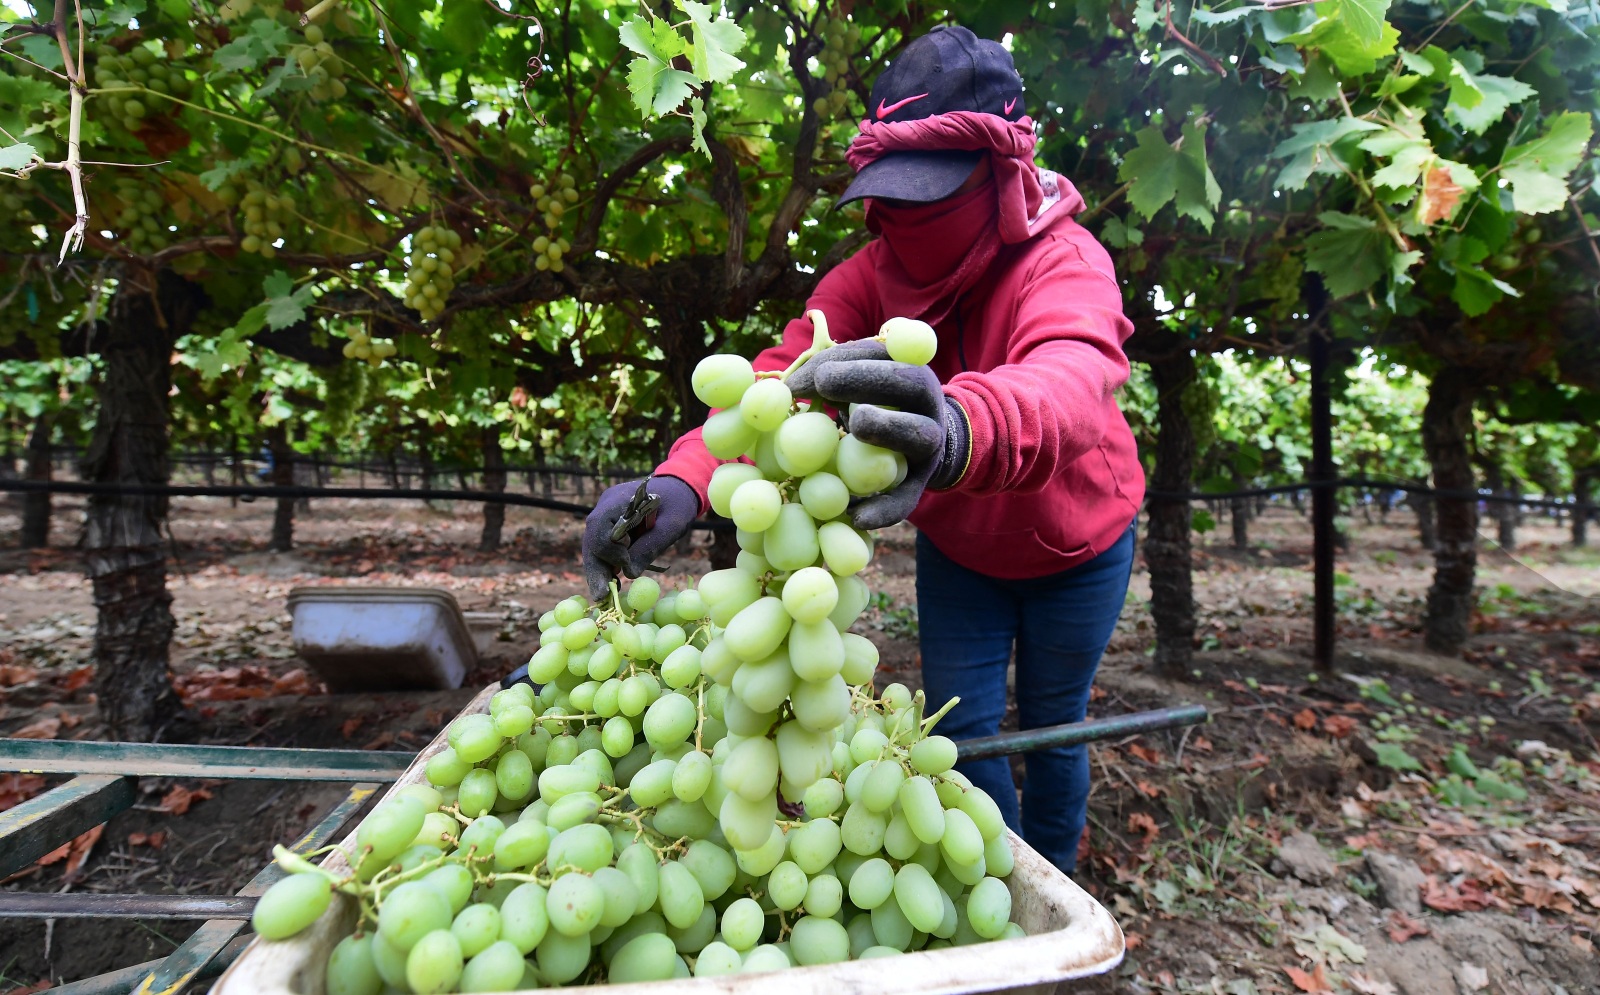 A person in a hooded jacket picks up green grapes in the middle of a vineyard